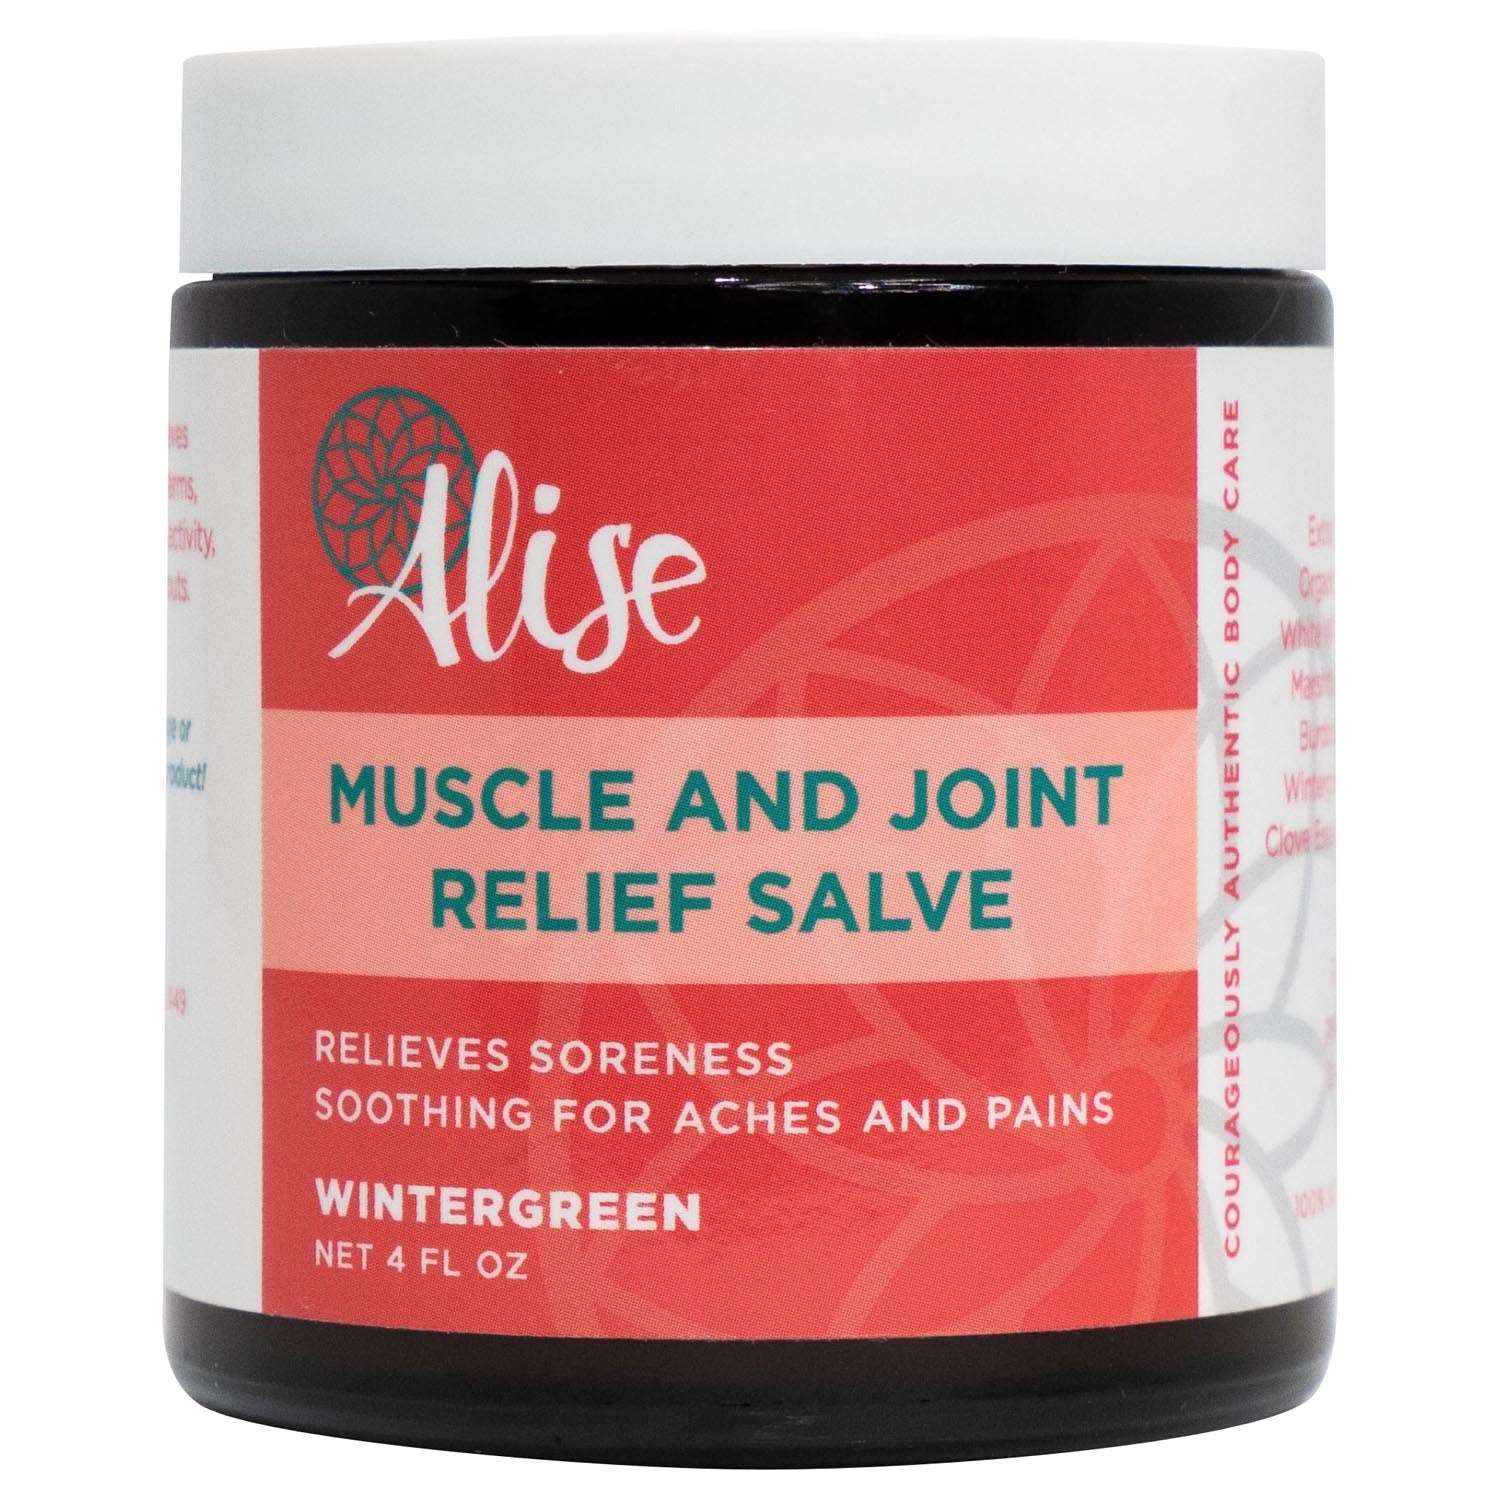 Muscle and Joint Relief Salve Wintergreen 4oz handcrafted by Alise Body Care